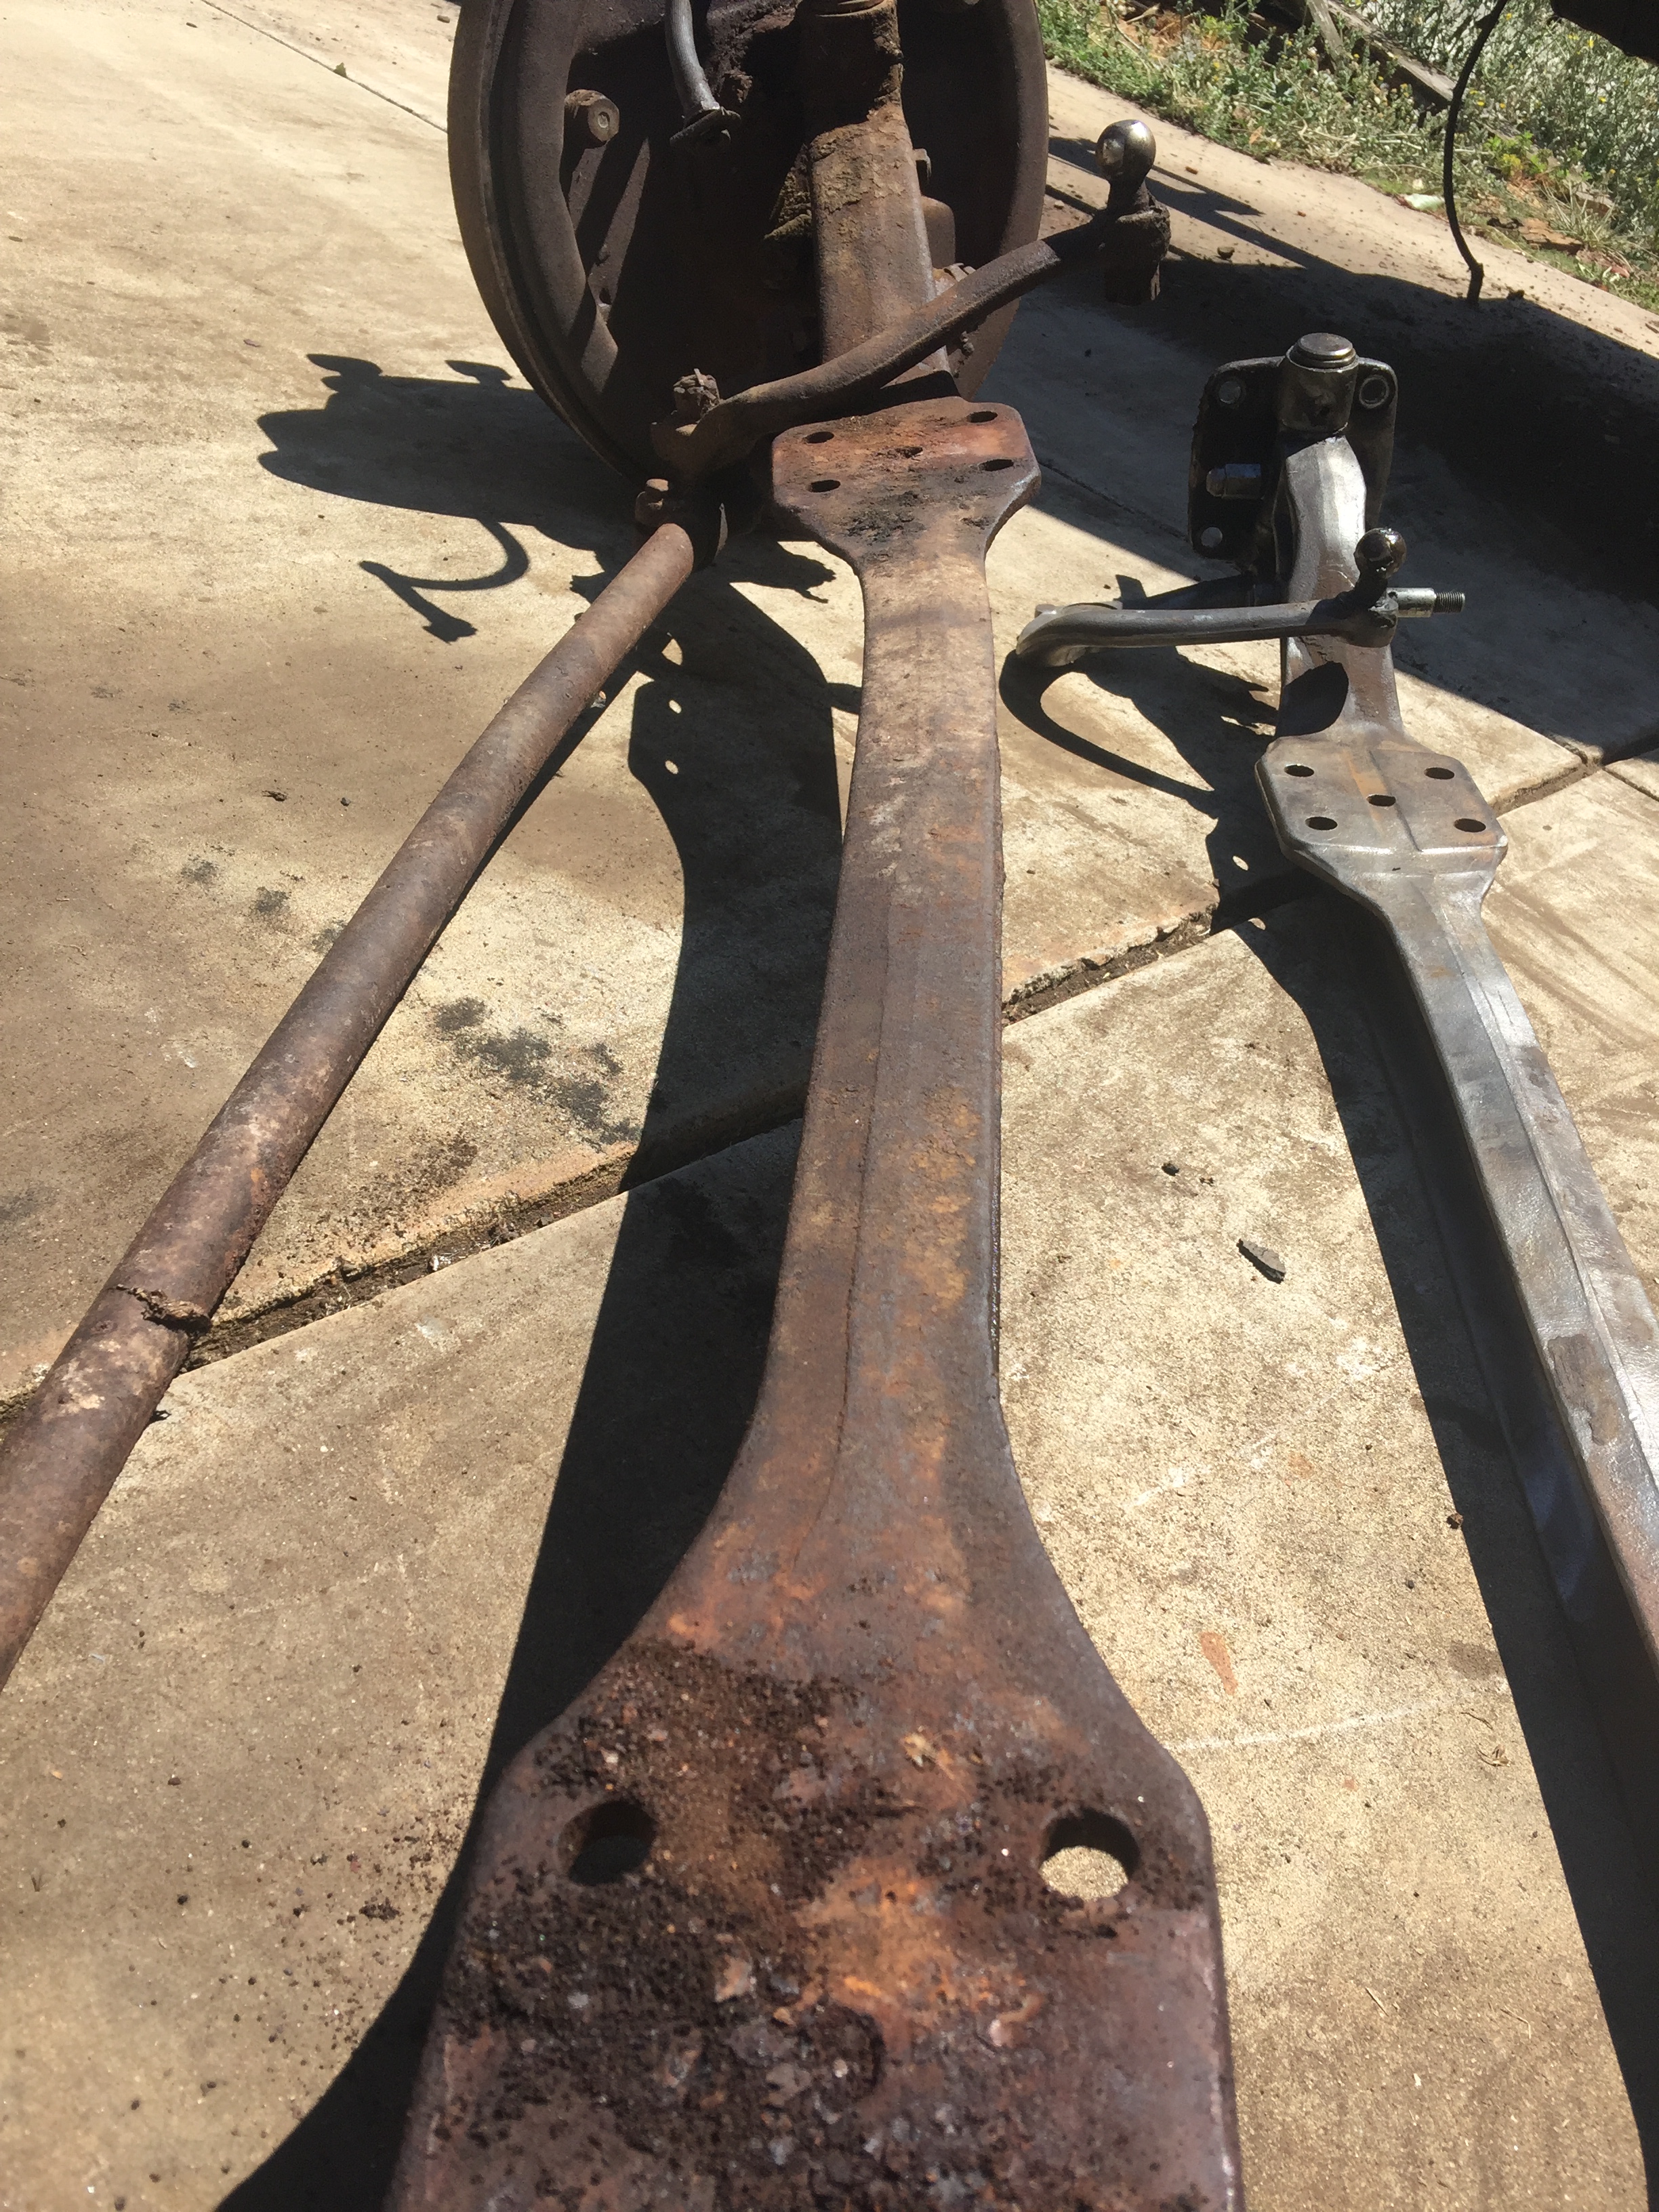 1941 ford truck - 41 ford truck - bent mondo front axle